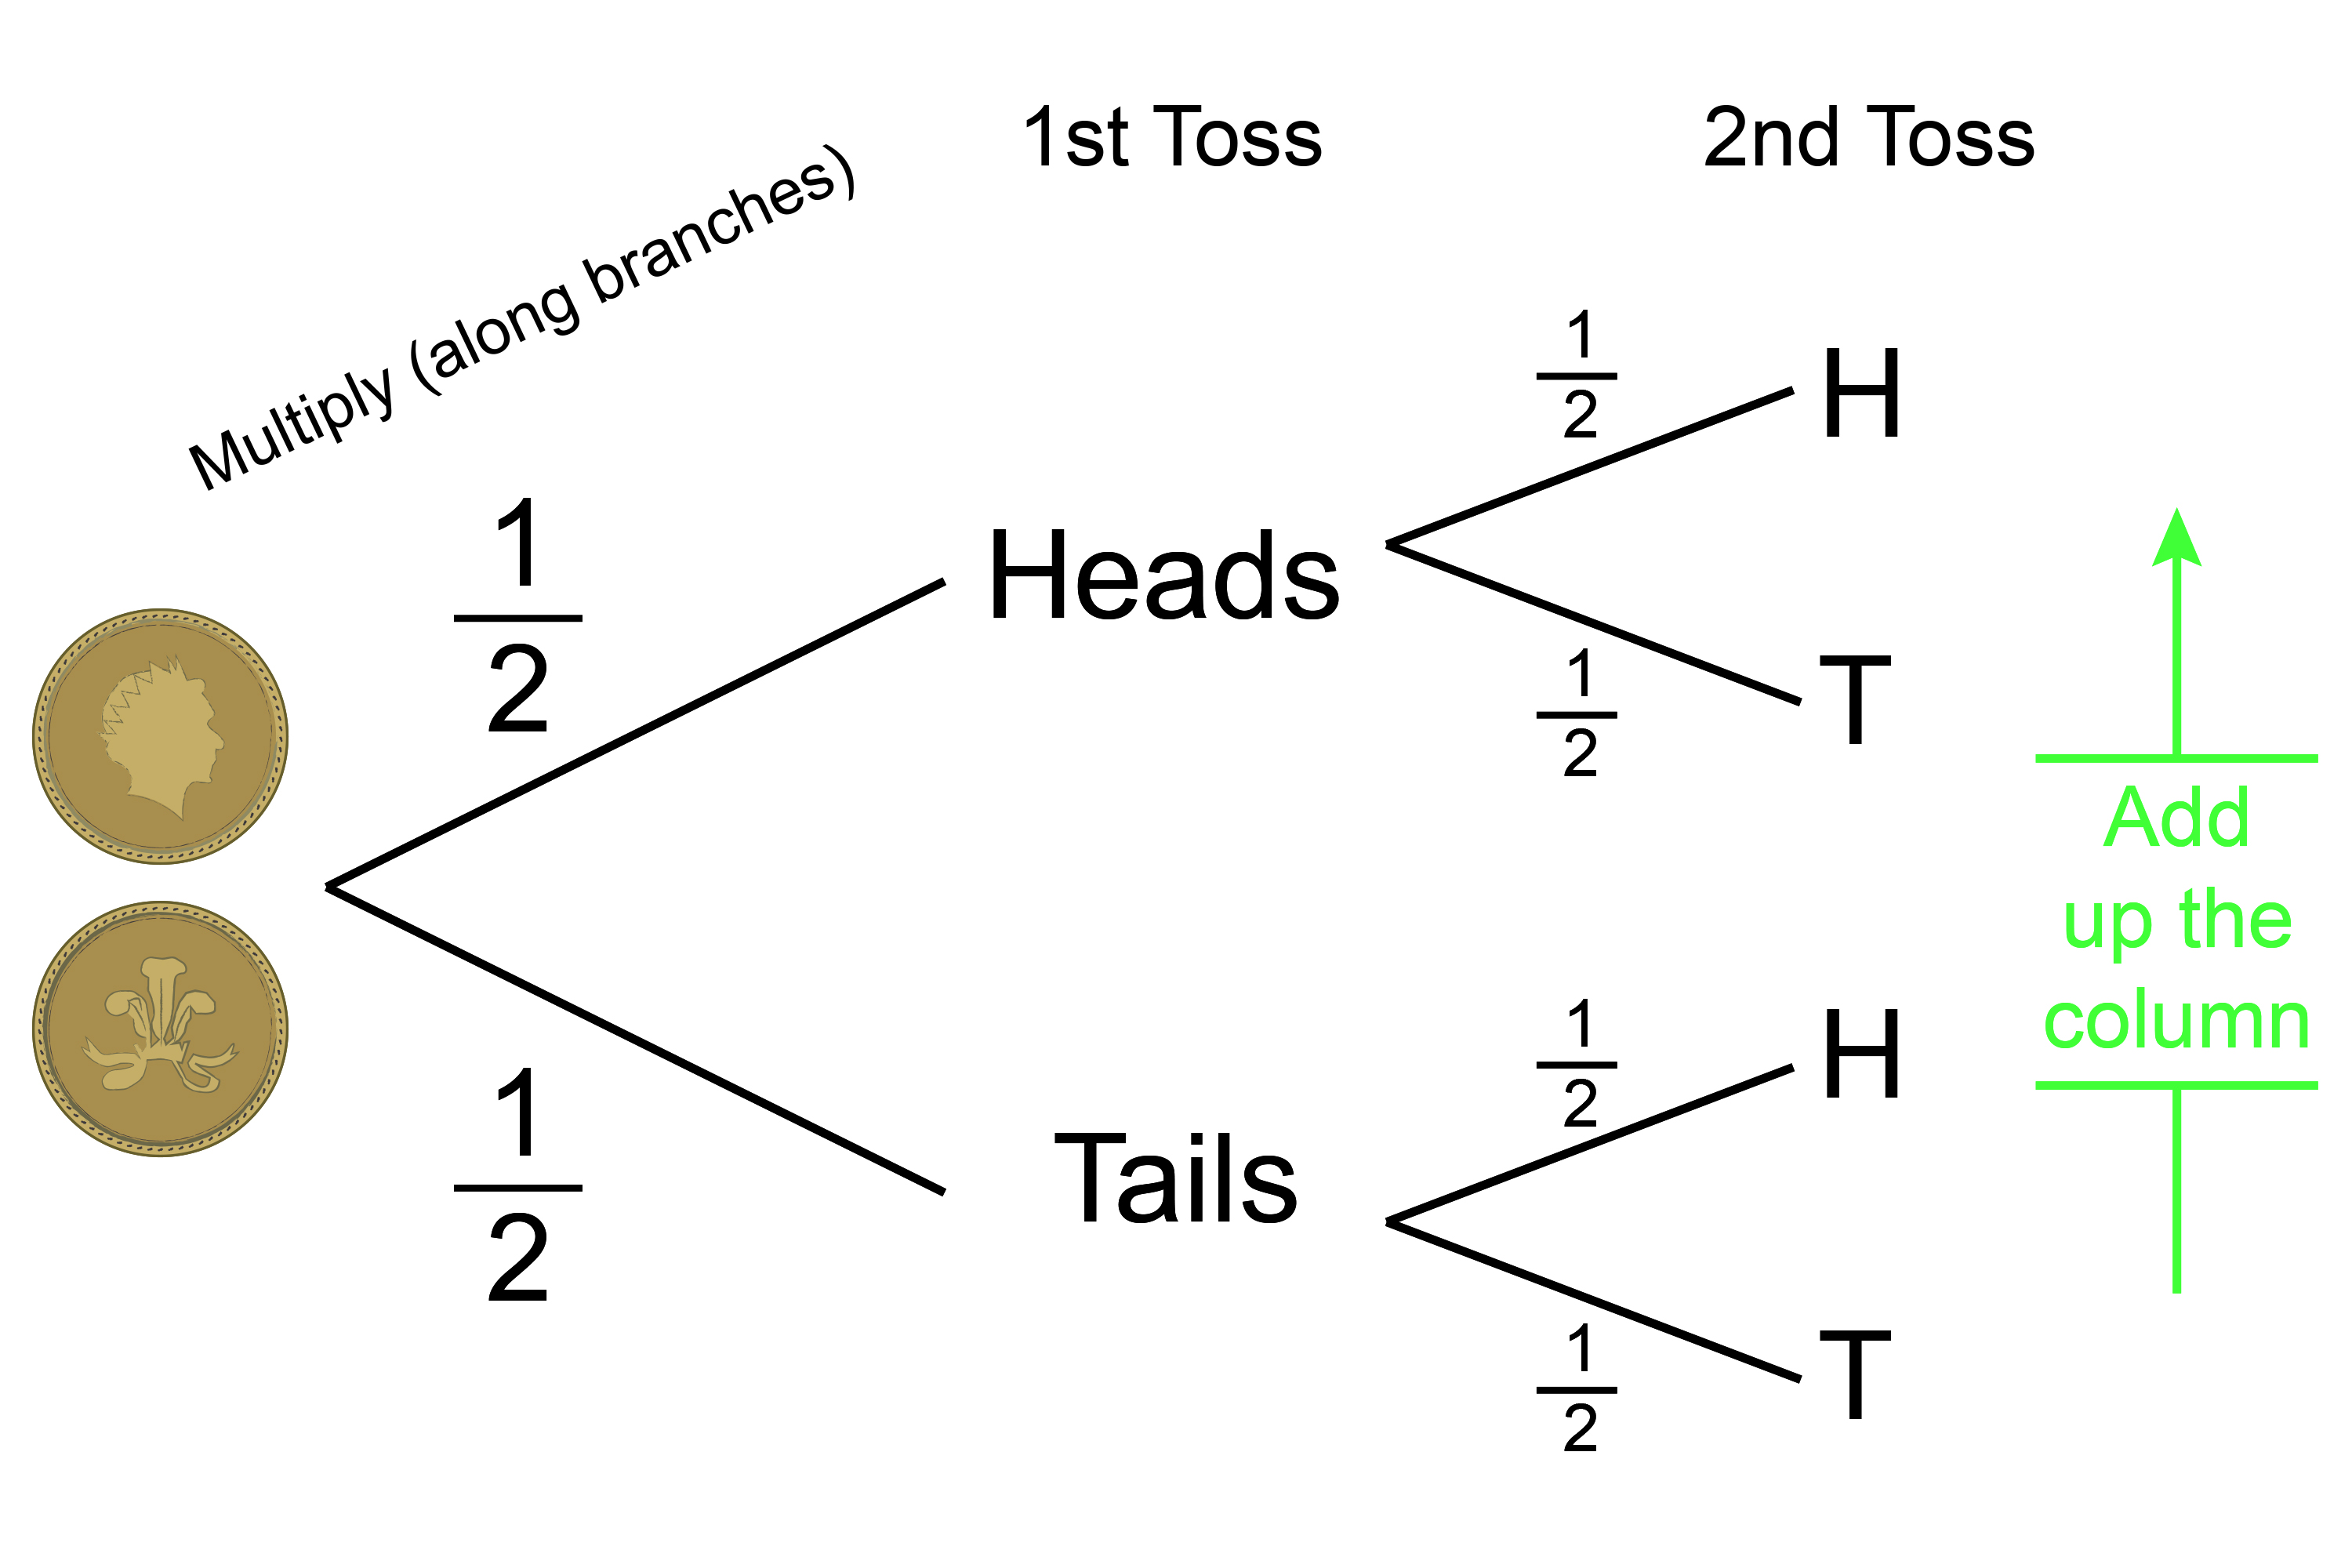 Probability tree of tossing a coin